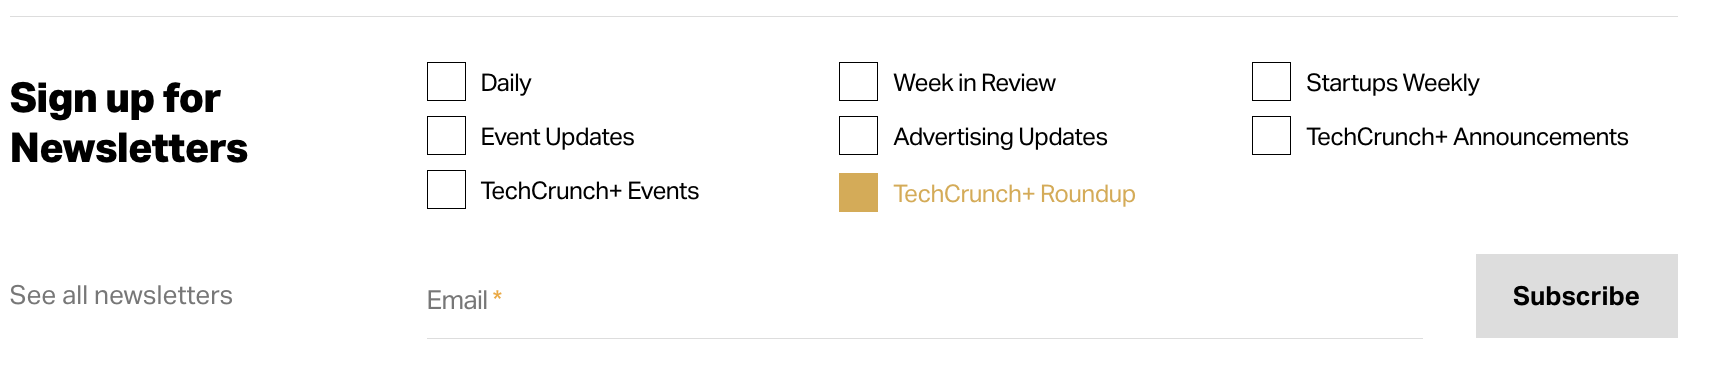 sign up for the TechCrunch+ roundup newsletter